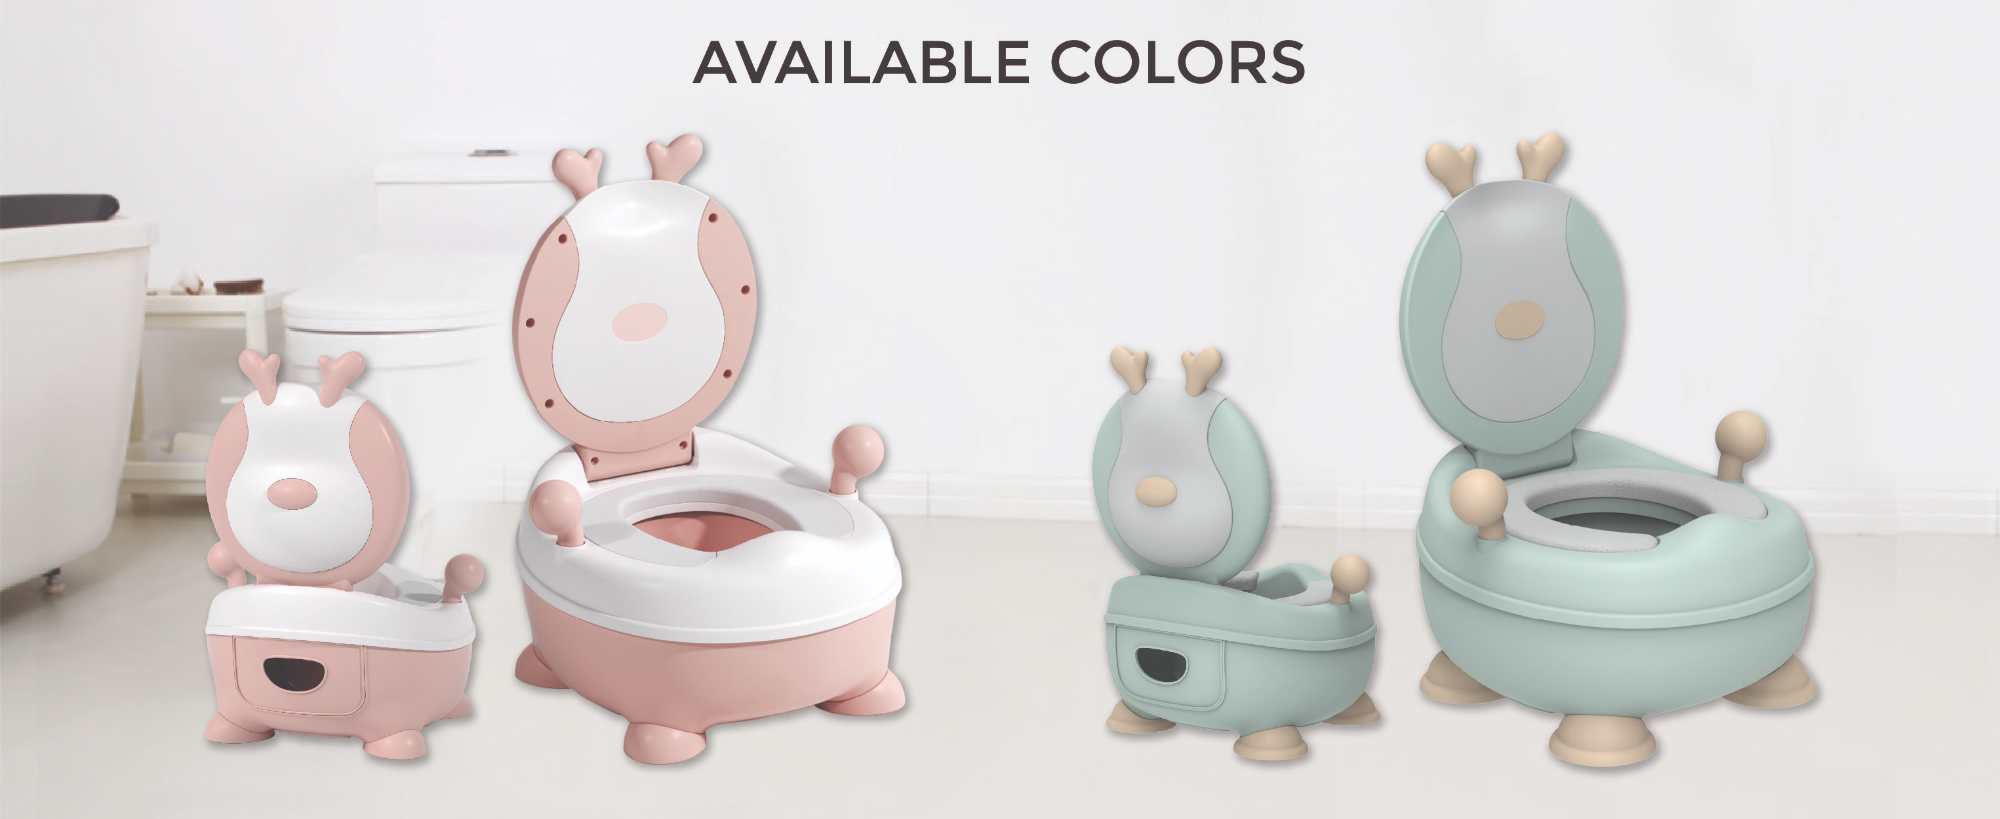 polka tots baby potty seat online pink color potty seat